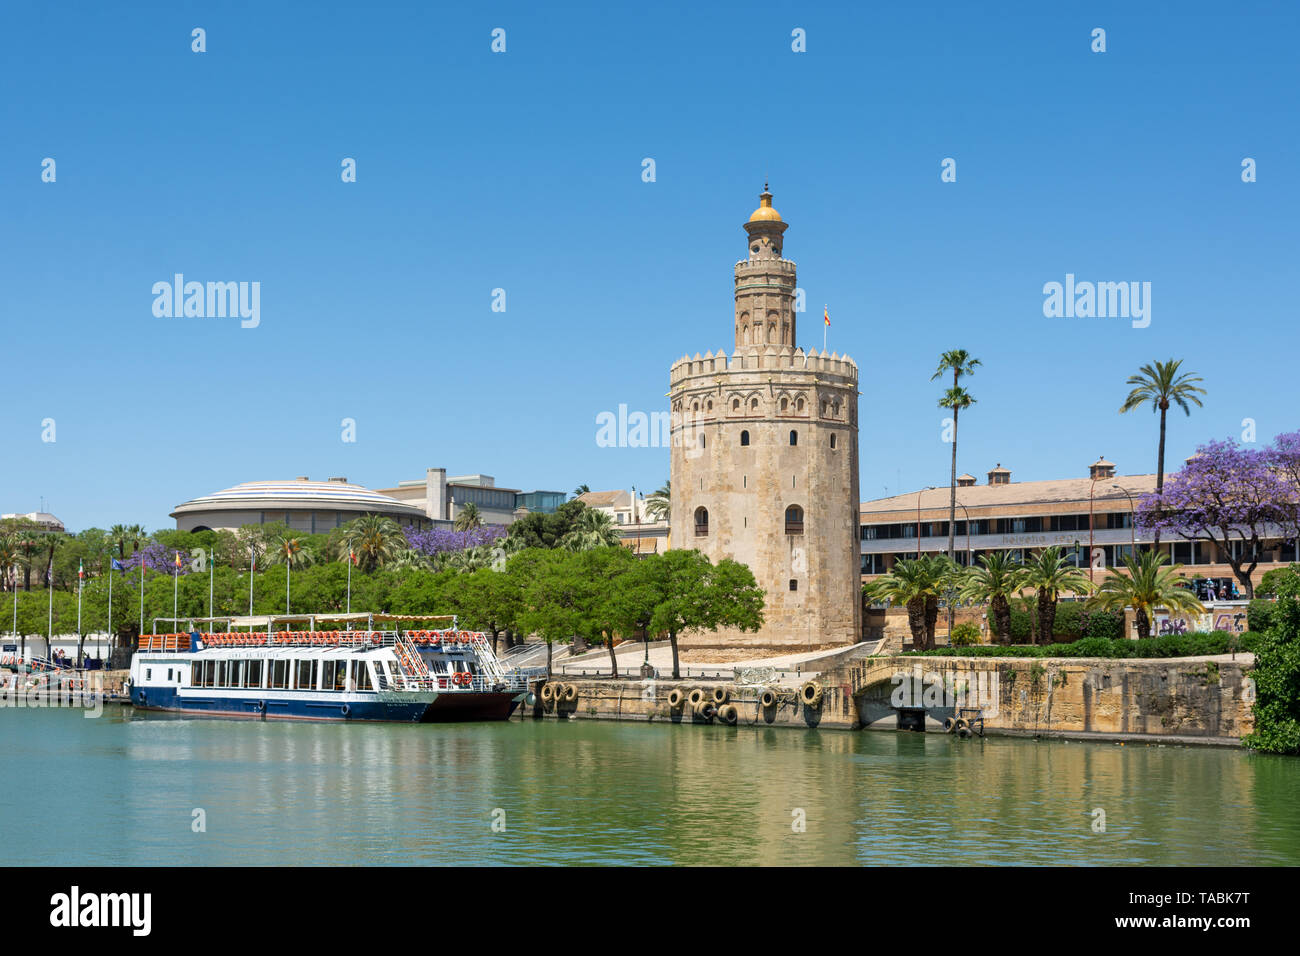 Tourist river boat moored alongside the tower of the Torre del Oro Naval Museum, Seville, Andalusia region, Spain Stock Photo